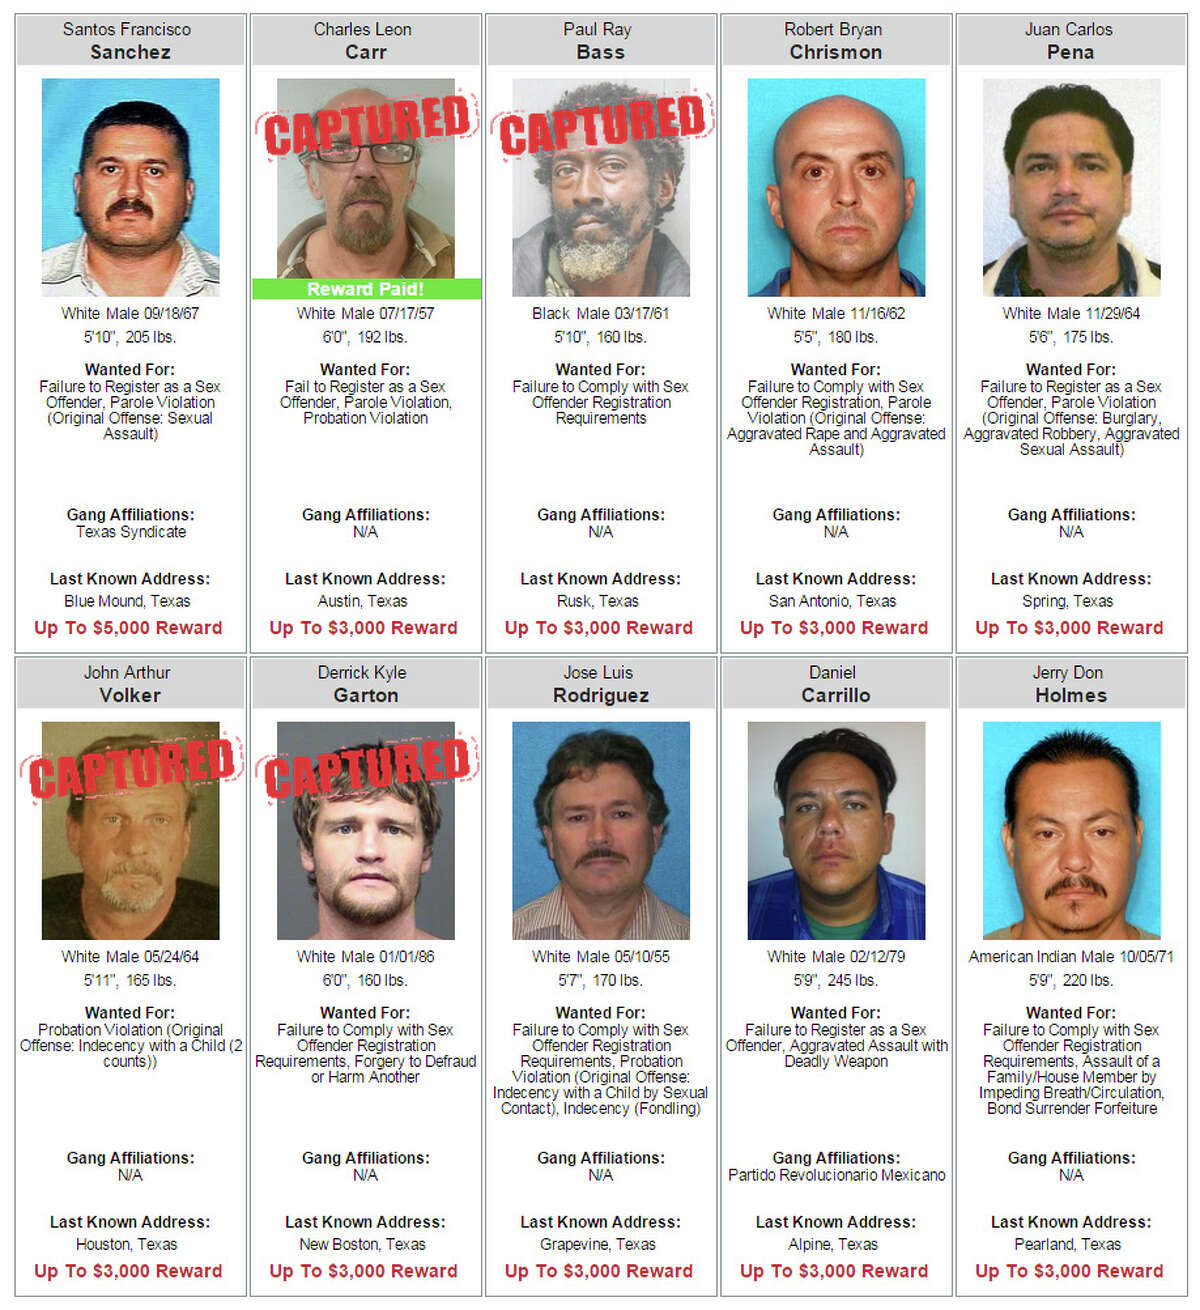 Texas Department of Public Safety's 10 most-wanted sex offenders list. http://www.dps.texas.gov/texas10mostwanted/SexOffenders.aspx